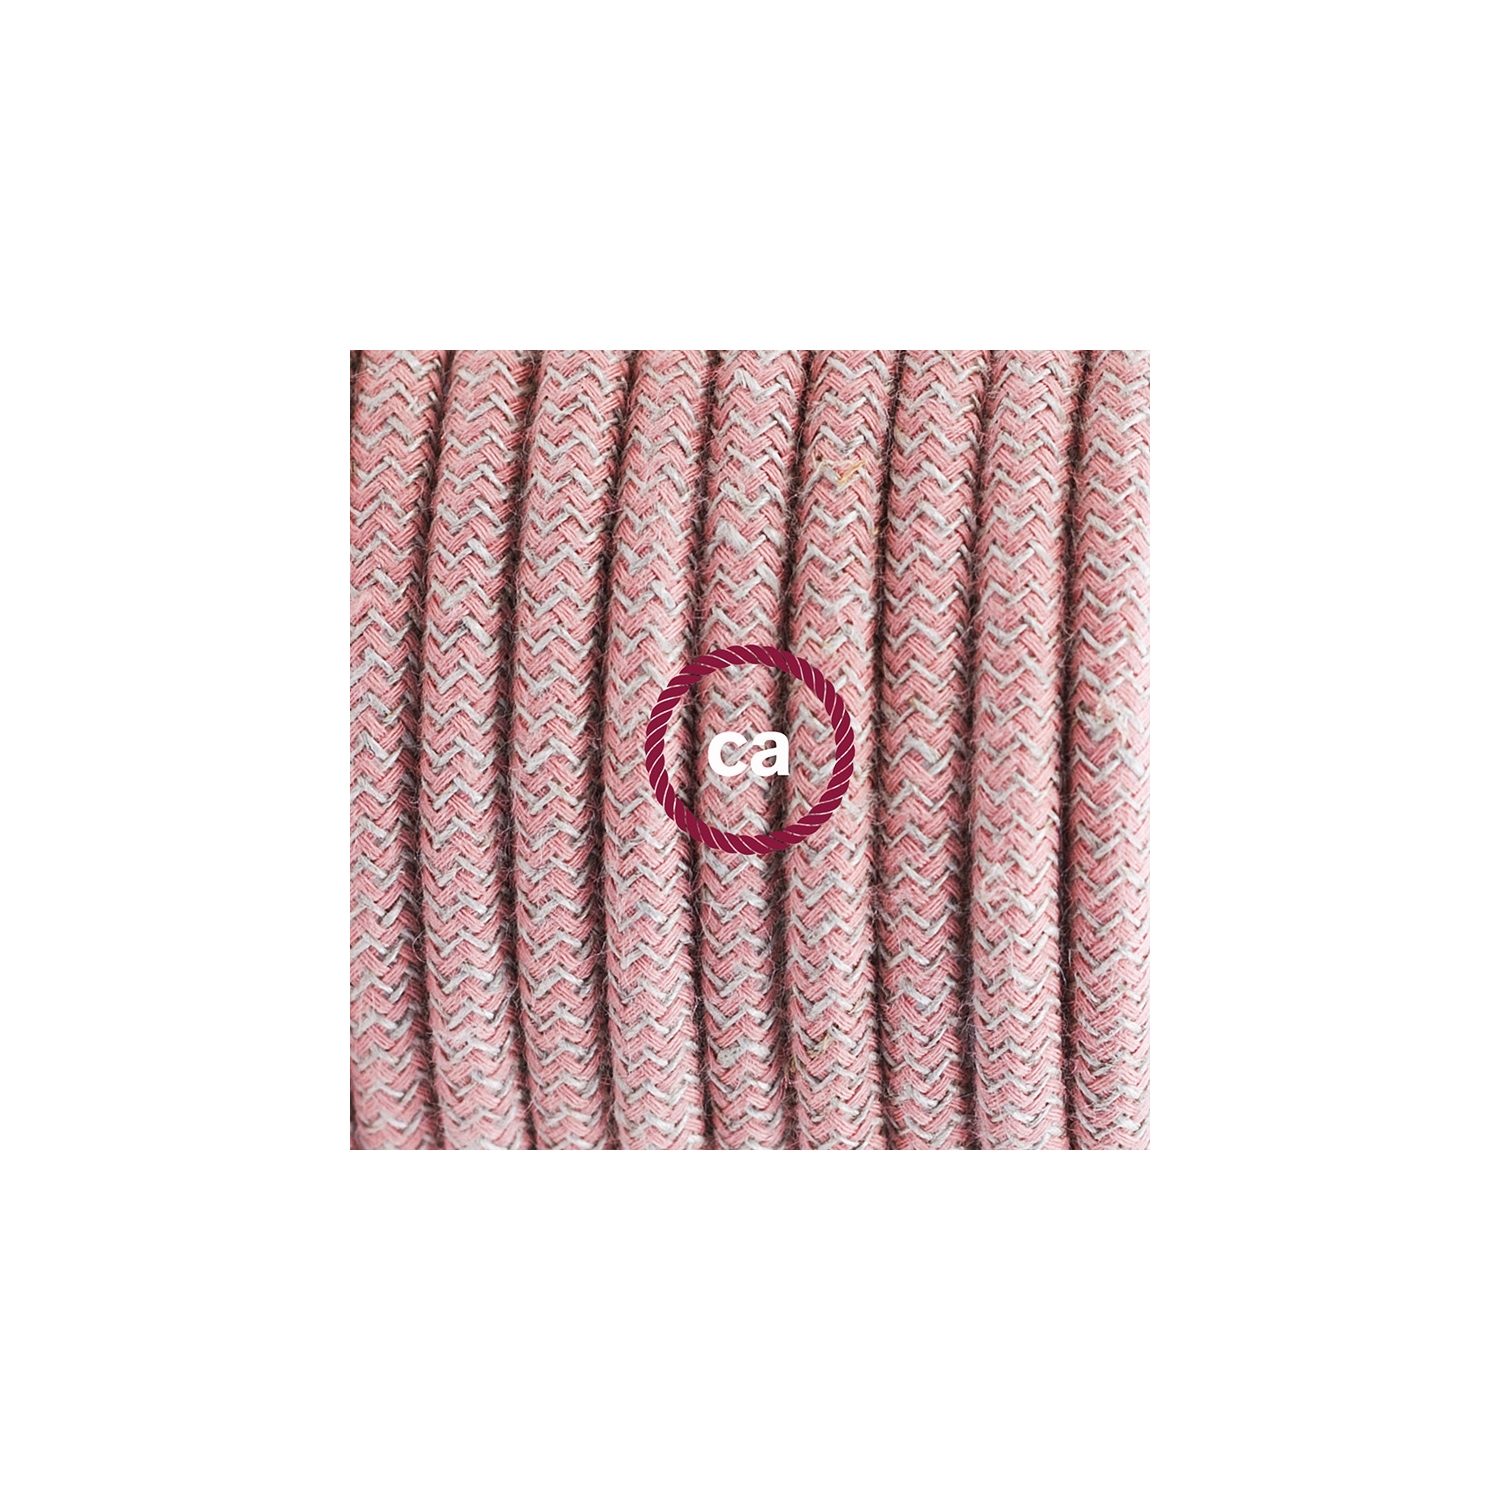 Plug-in Pendant with switch on socket | RD71 Natural & Pink Linen Chevron